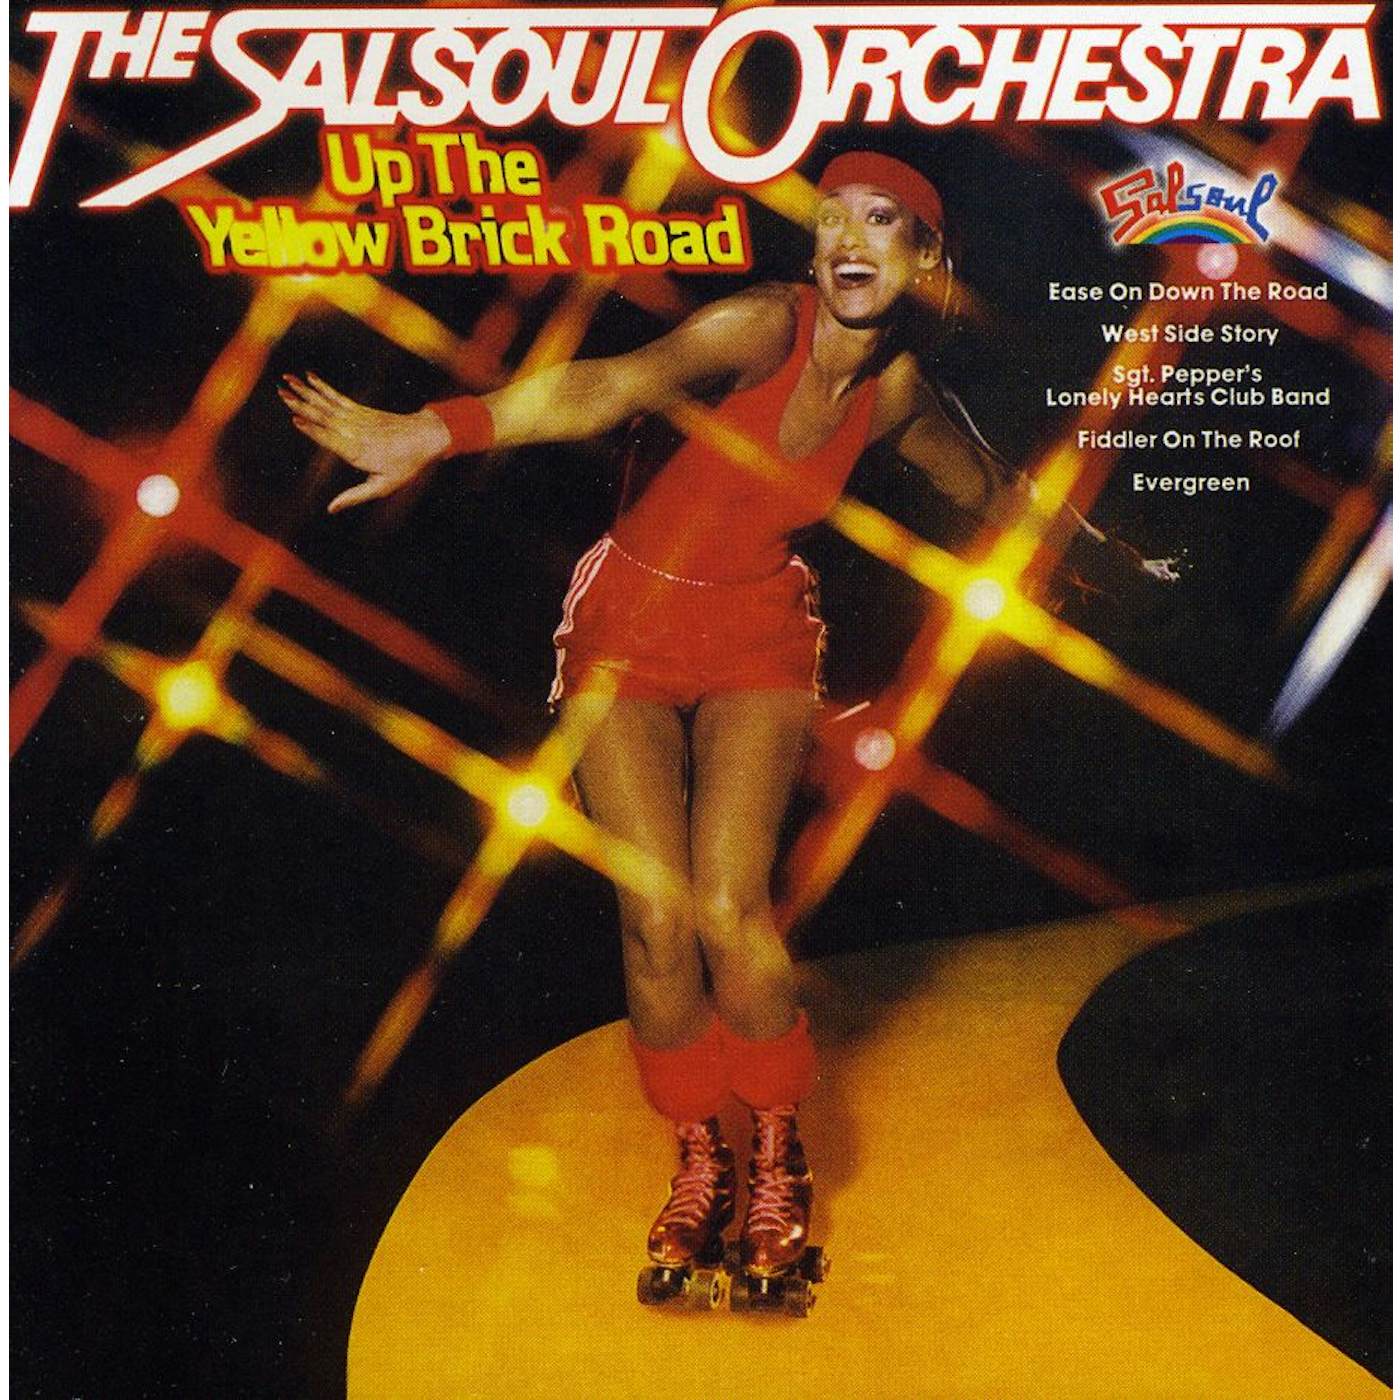 The Salsoul Orchestra UP THE YELLOW BRICK ROAD CD